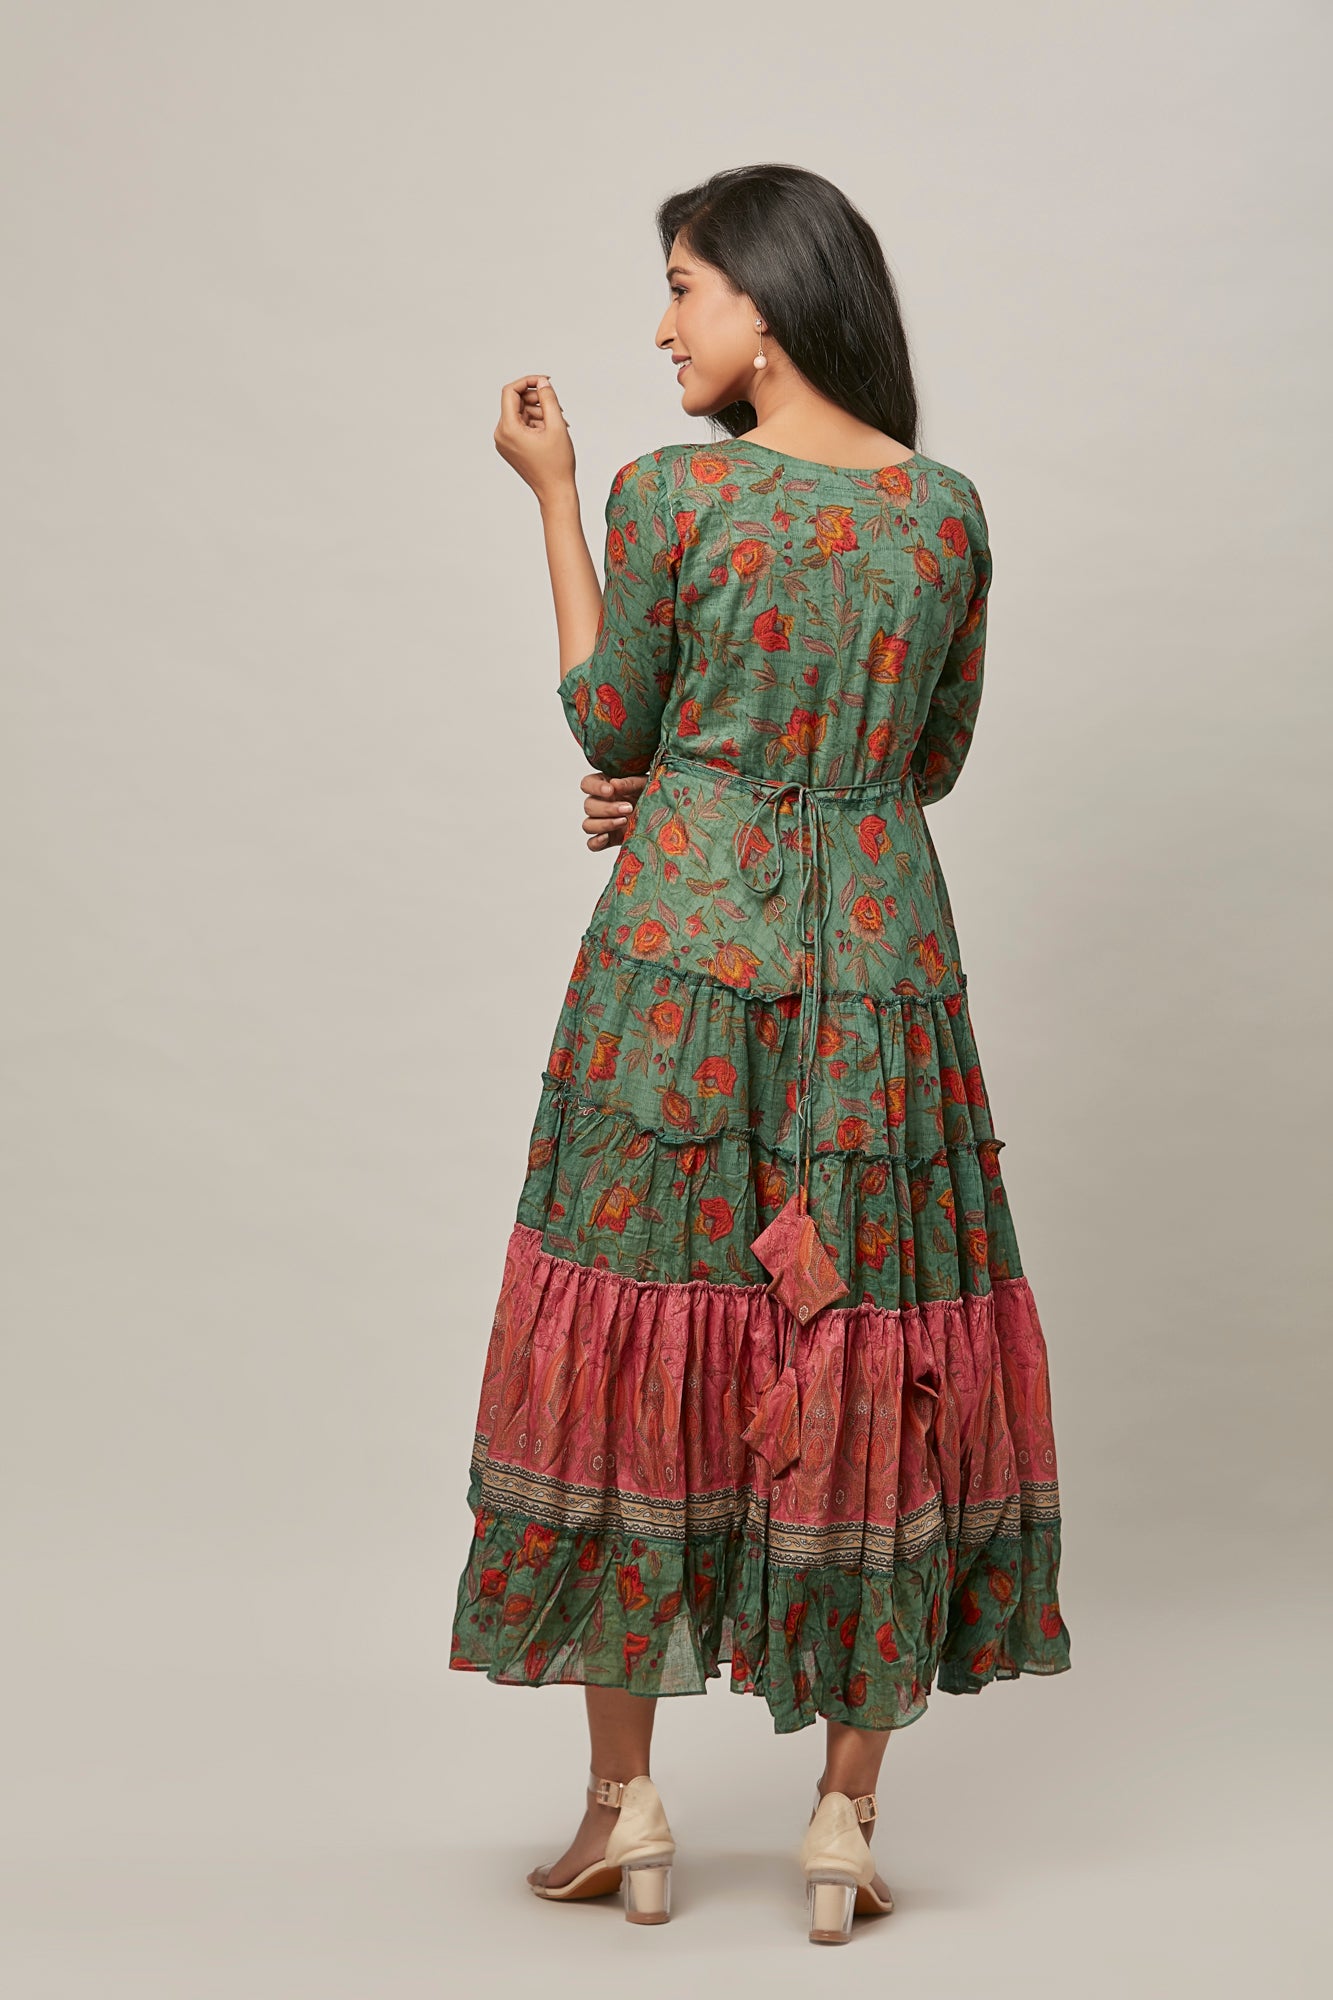 Urban Mystic Green Colored Flaired Dress Styled Kurta With Belt